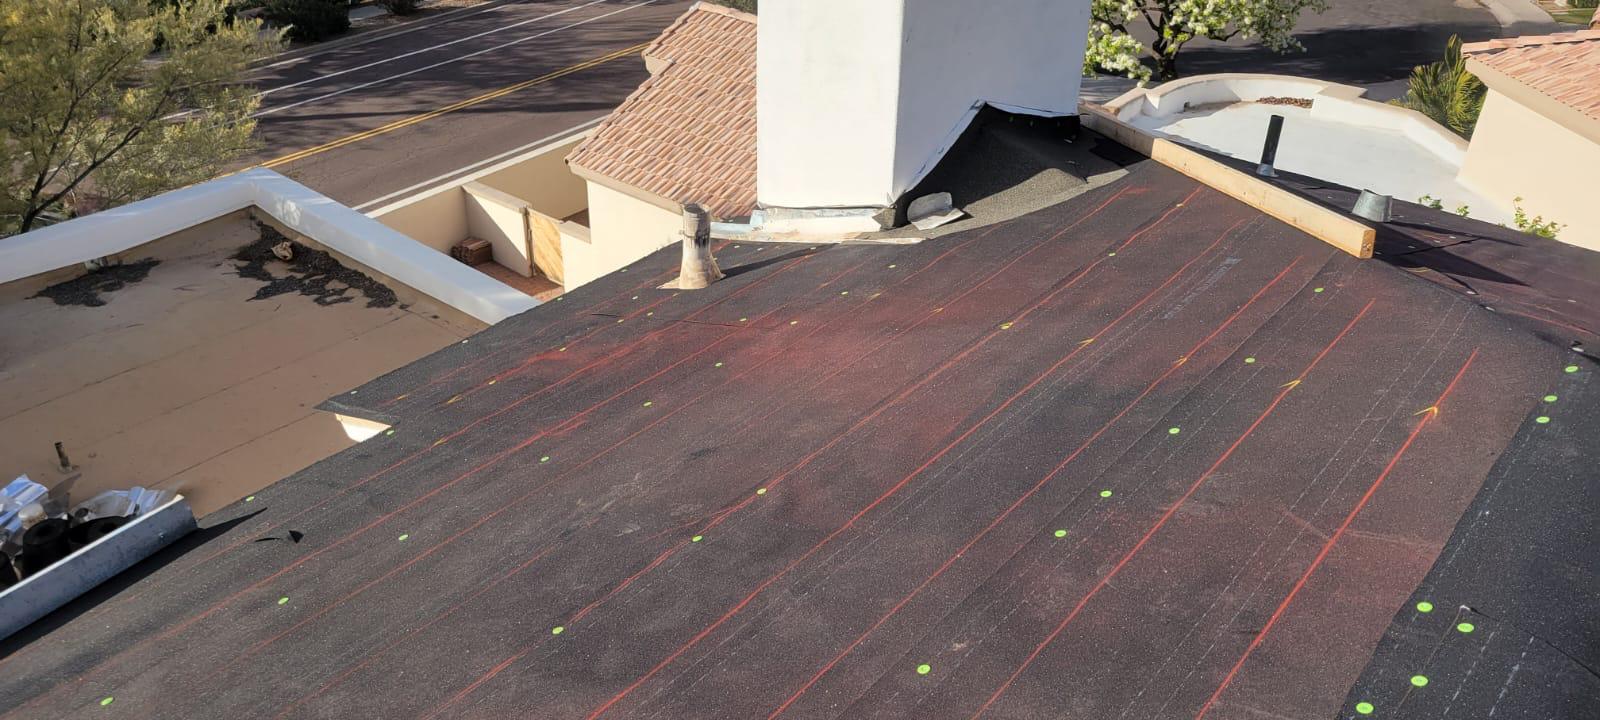 Installation of roofing underlayment for tile re-felt in Carefree.